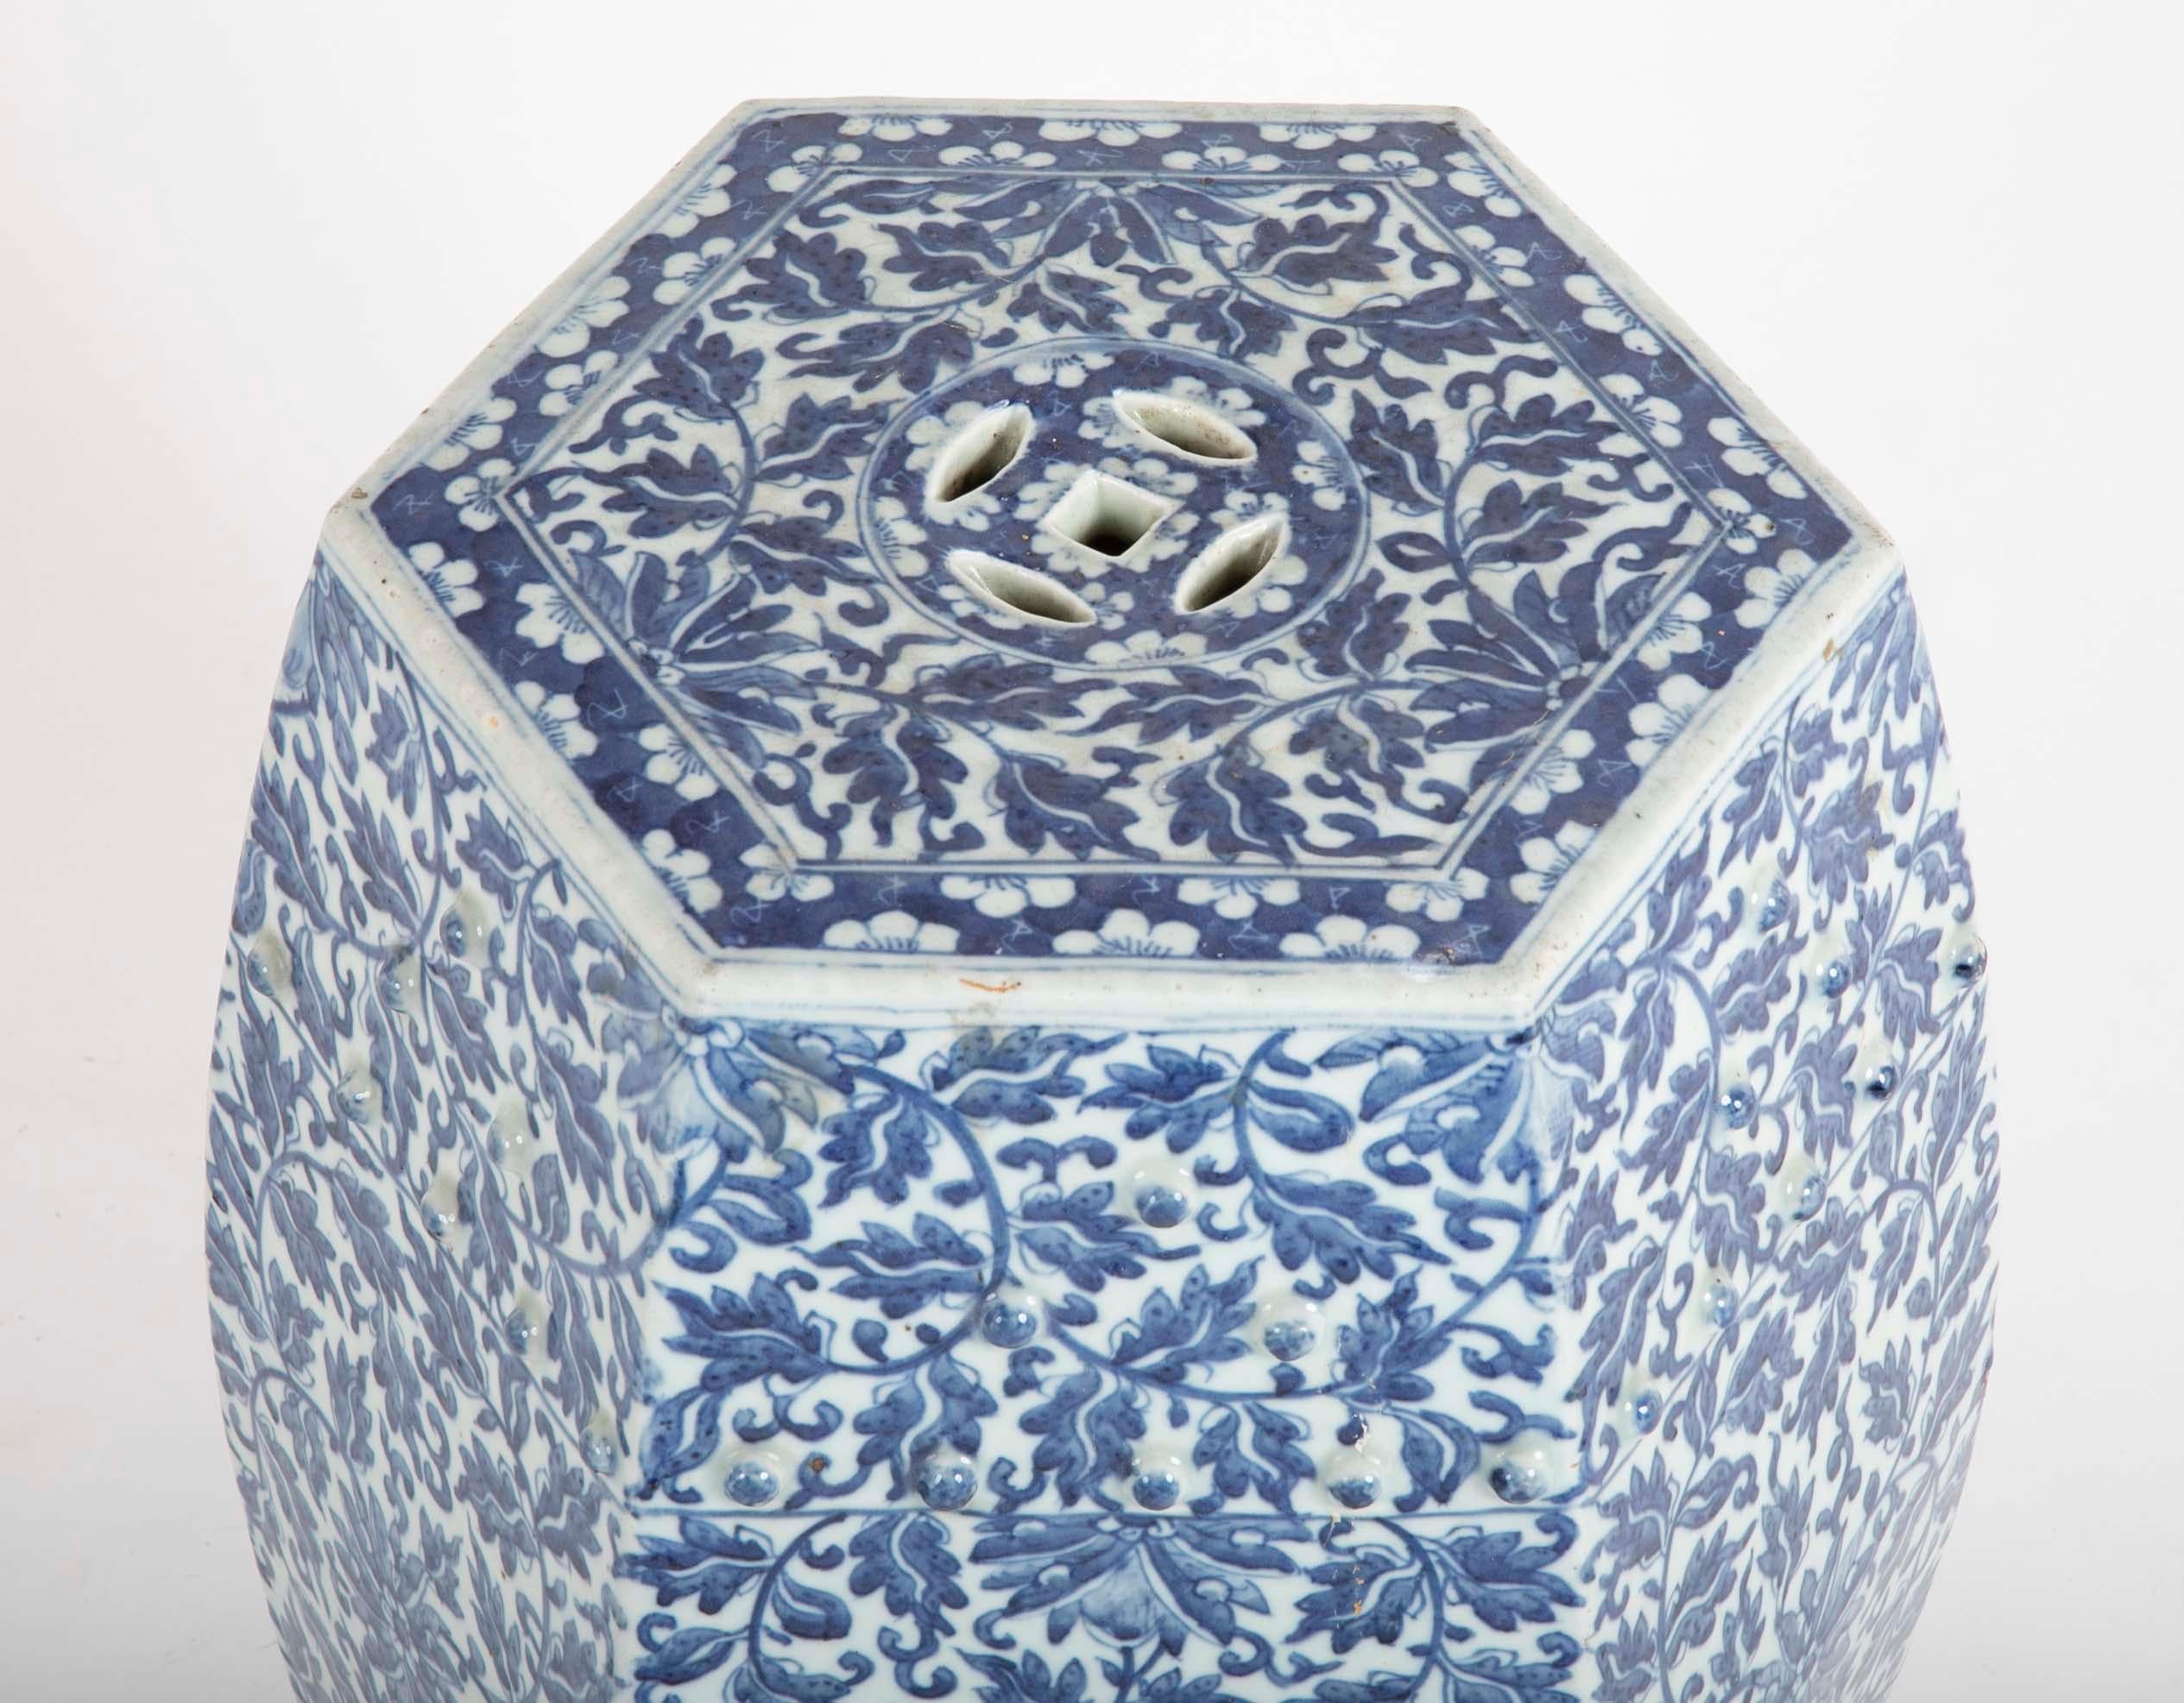 19th Century Sextagonal Blue and White Chinese Porcelain Garden Seat 2